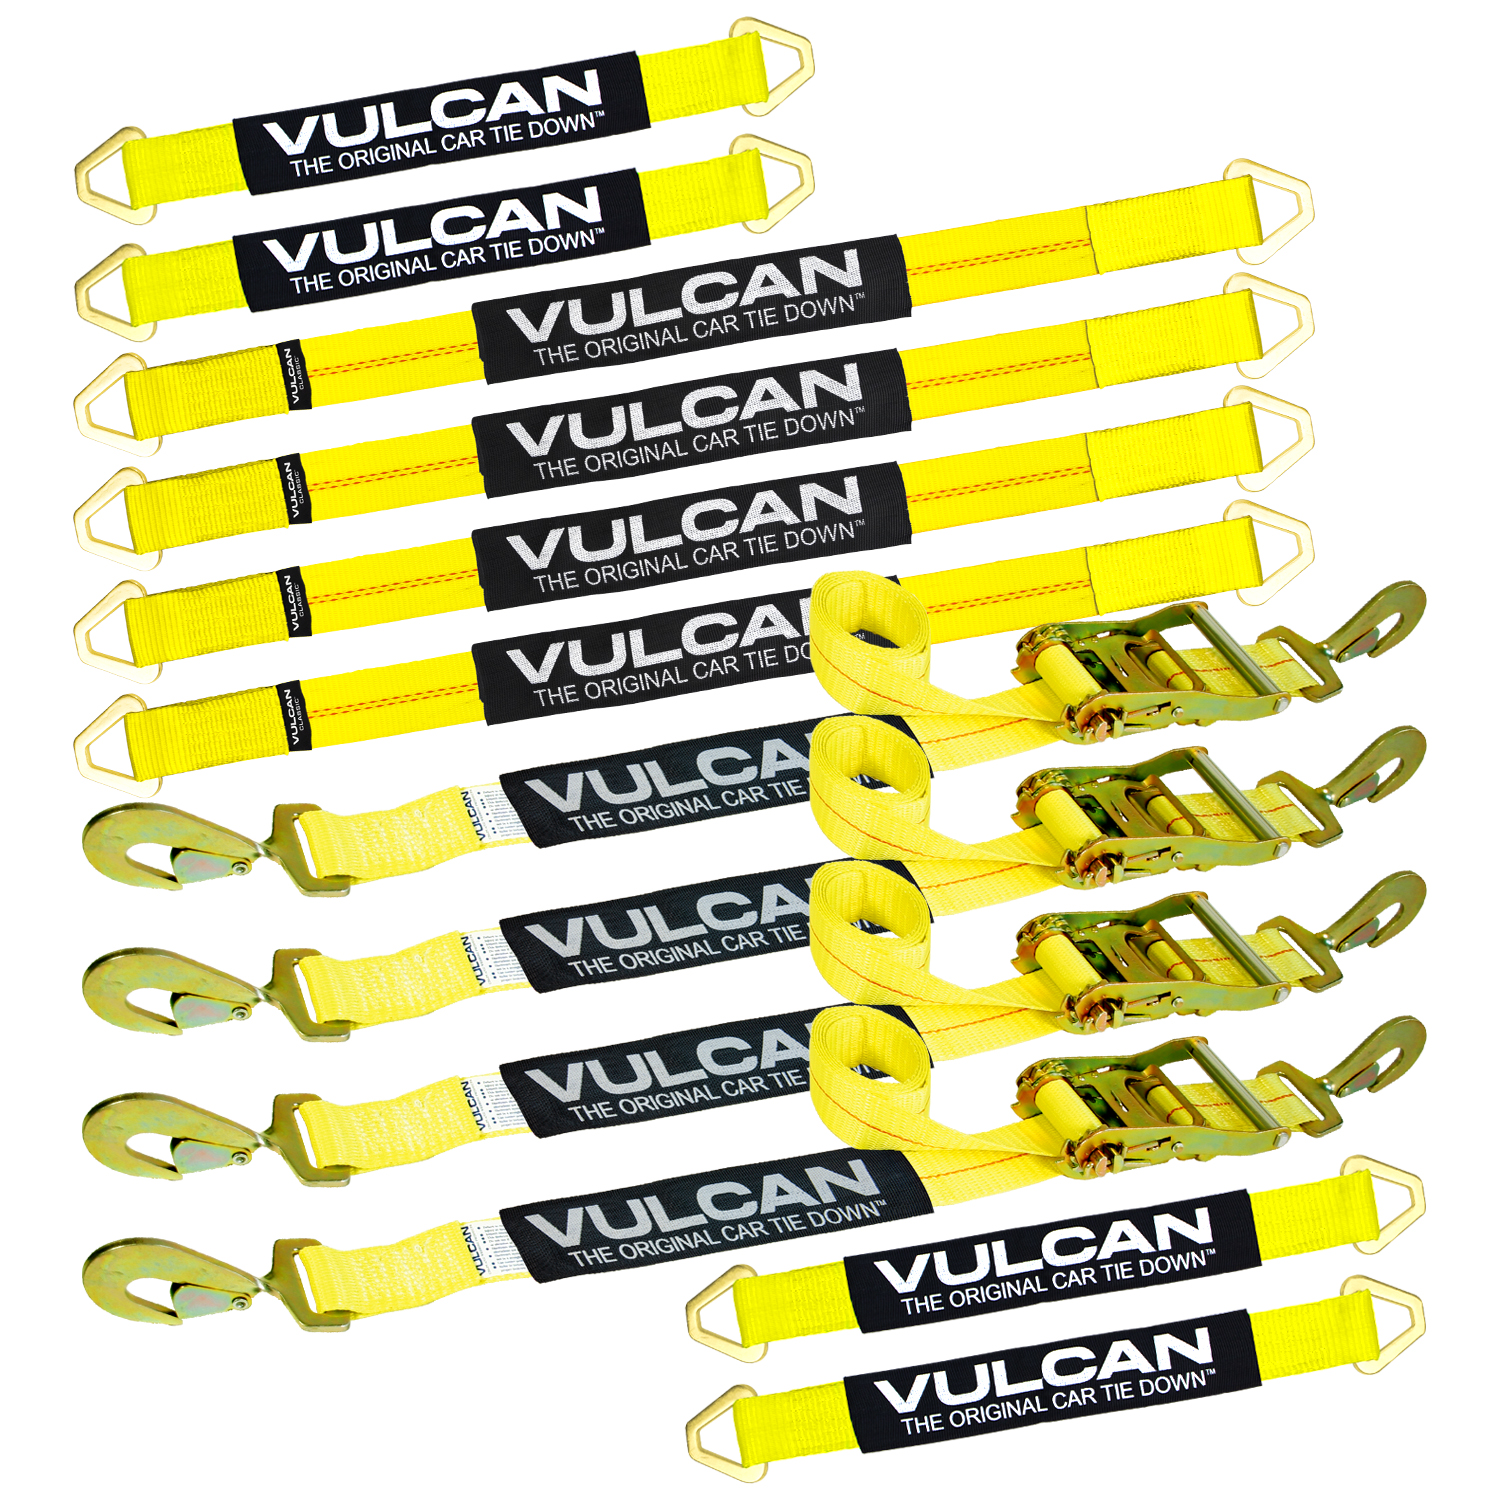 VULCAN Complete Axle Strap Tie Down Kits with Snap Hook Ratchet Straps -  Include (4) 22 Inch Axle Straps, (4) 36 Inch Axle Straps, and (4) 8' Snap  Hook Ratchet Straps